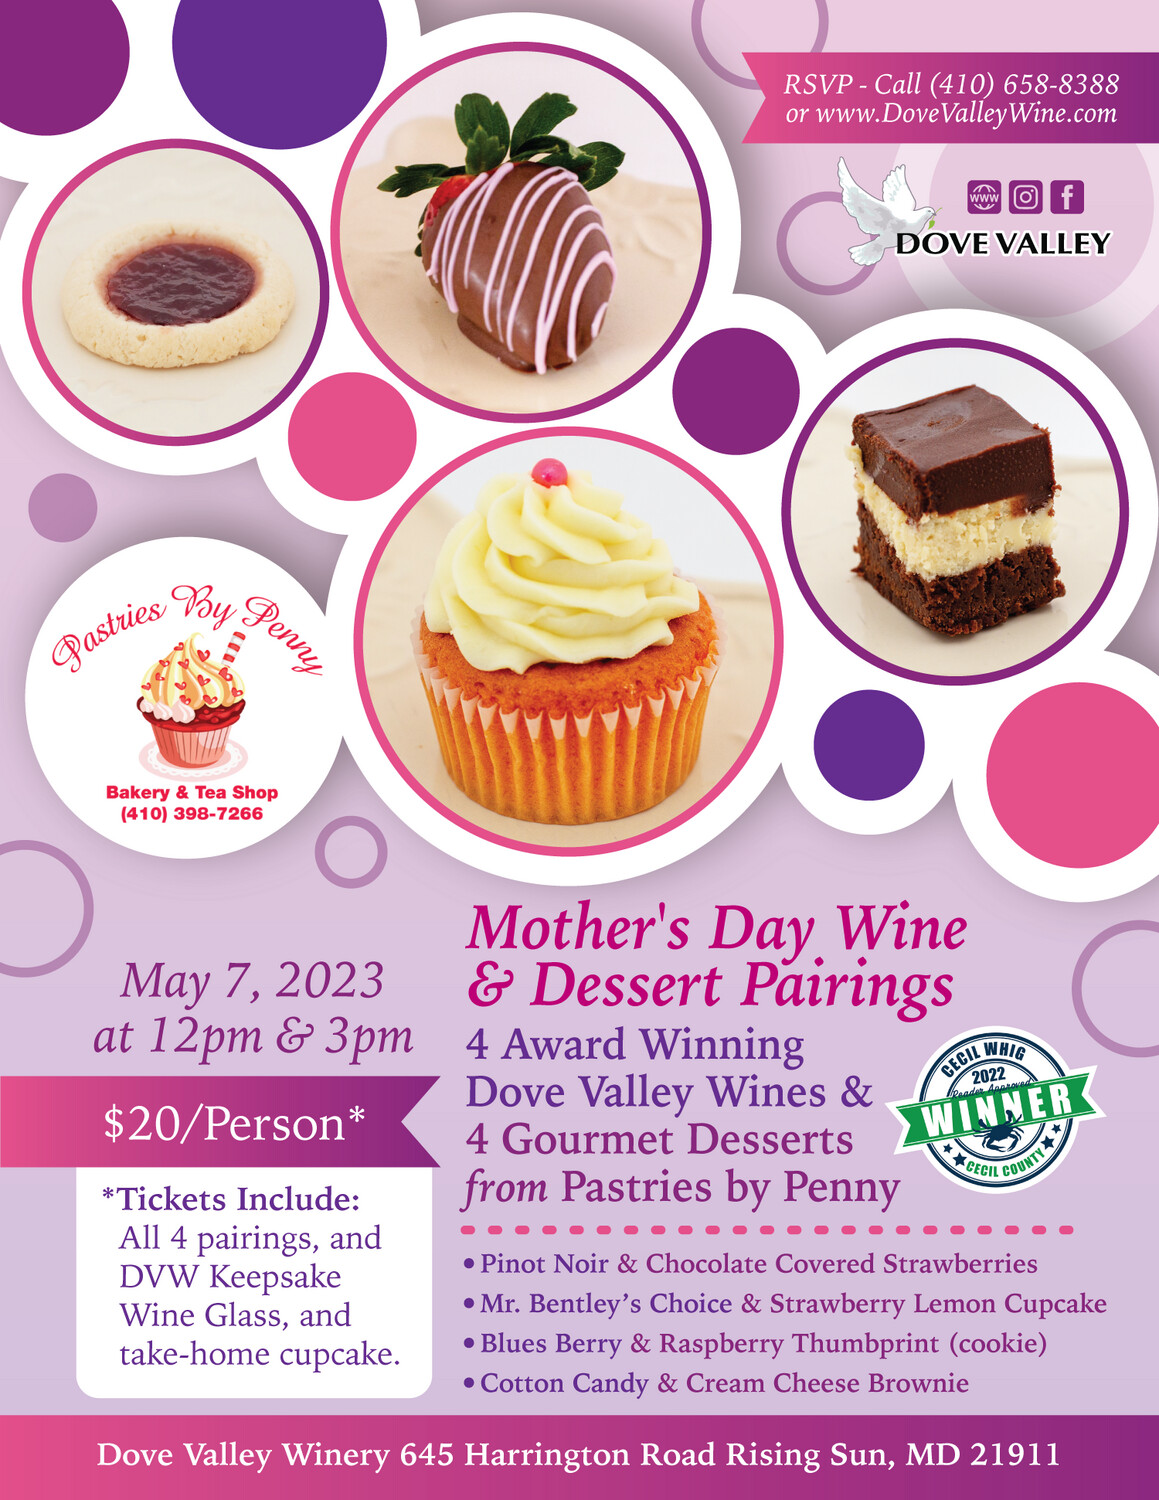 Mothers Day Pairing**May 7th @ 3pm**